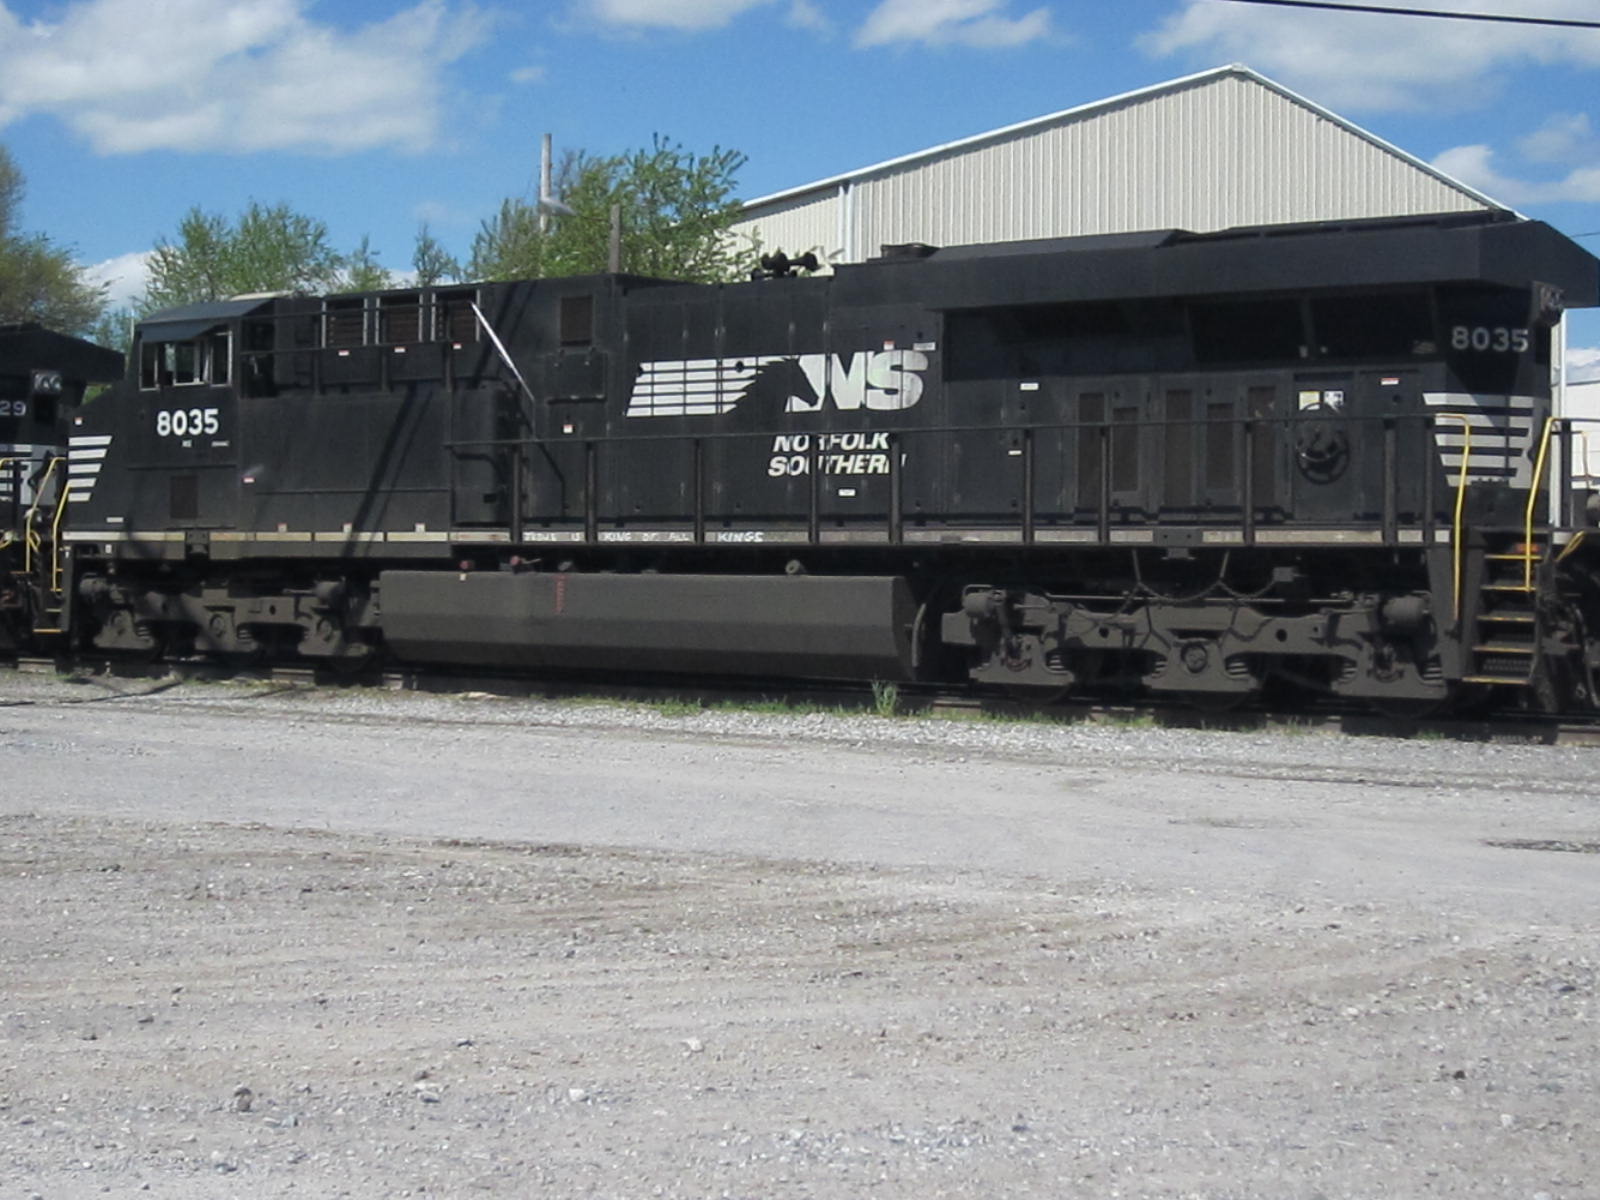 NS 8035 being fueled as they are DPU's on the coal drag.